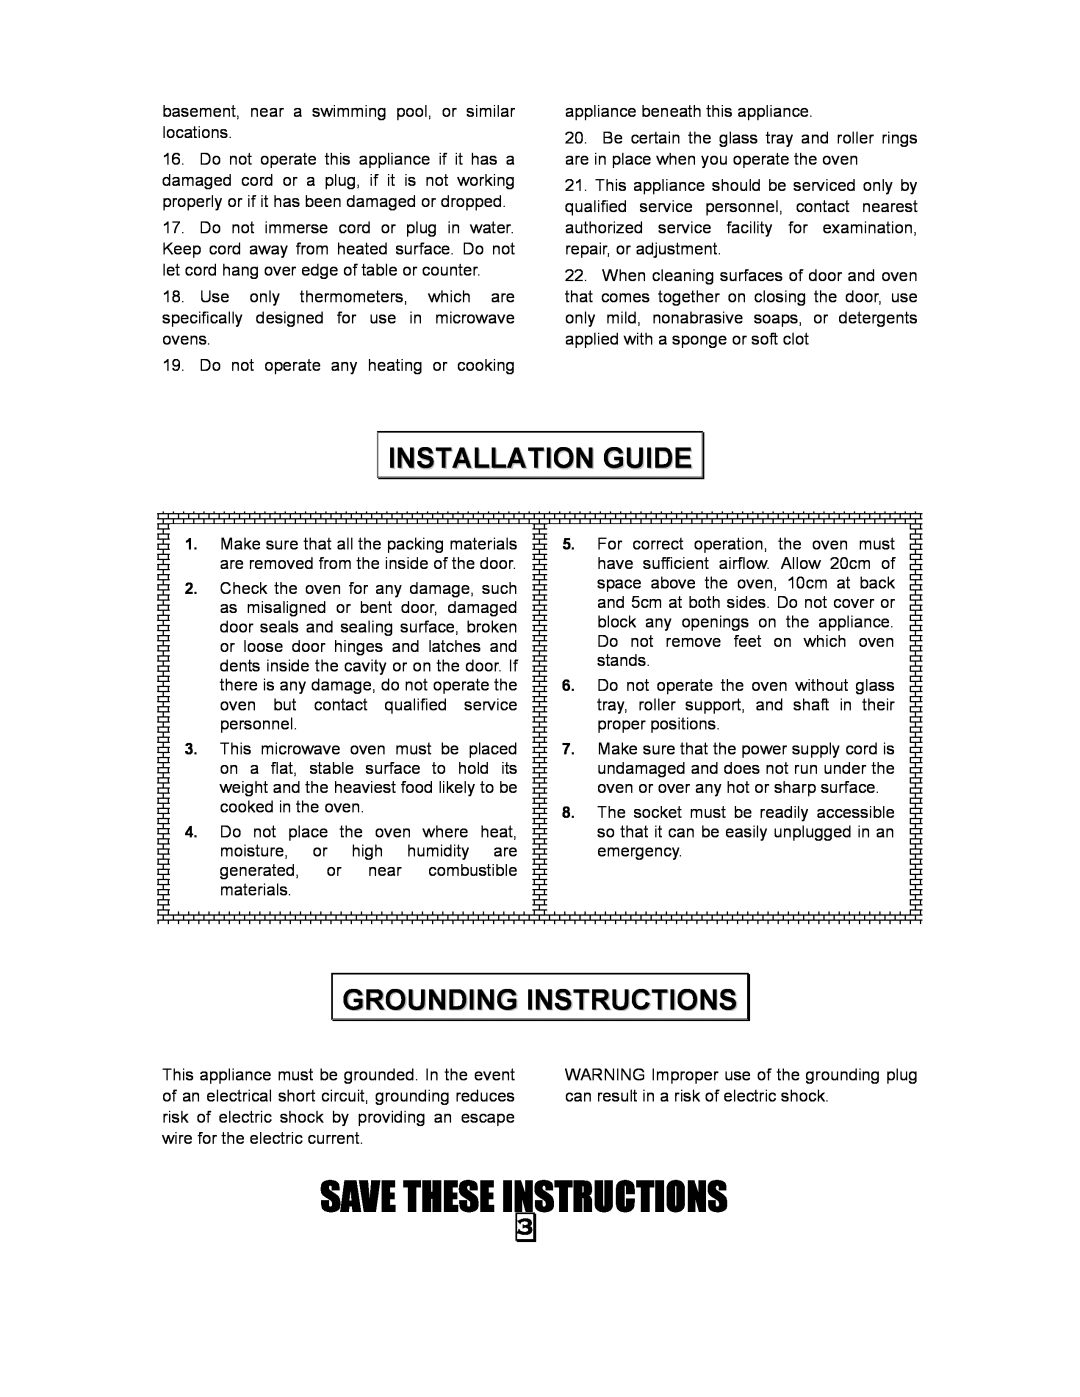 RCA RMW968 manual Installation Guide, Grounding Instructions, Save These Instructions 